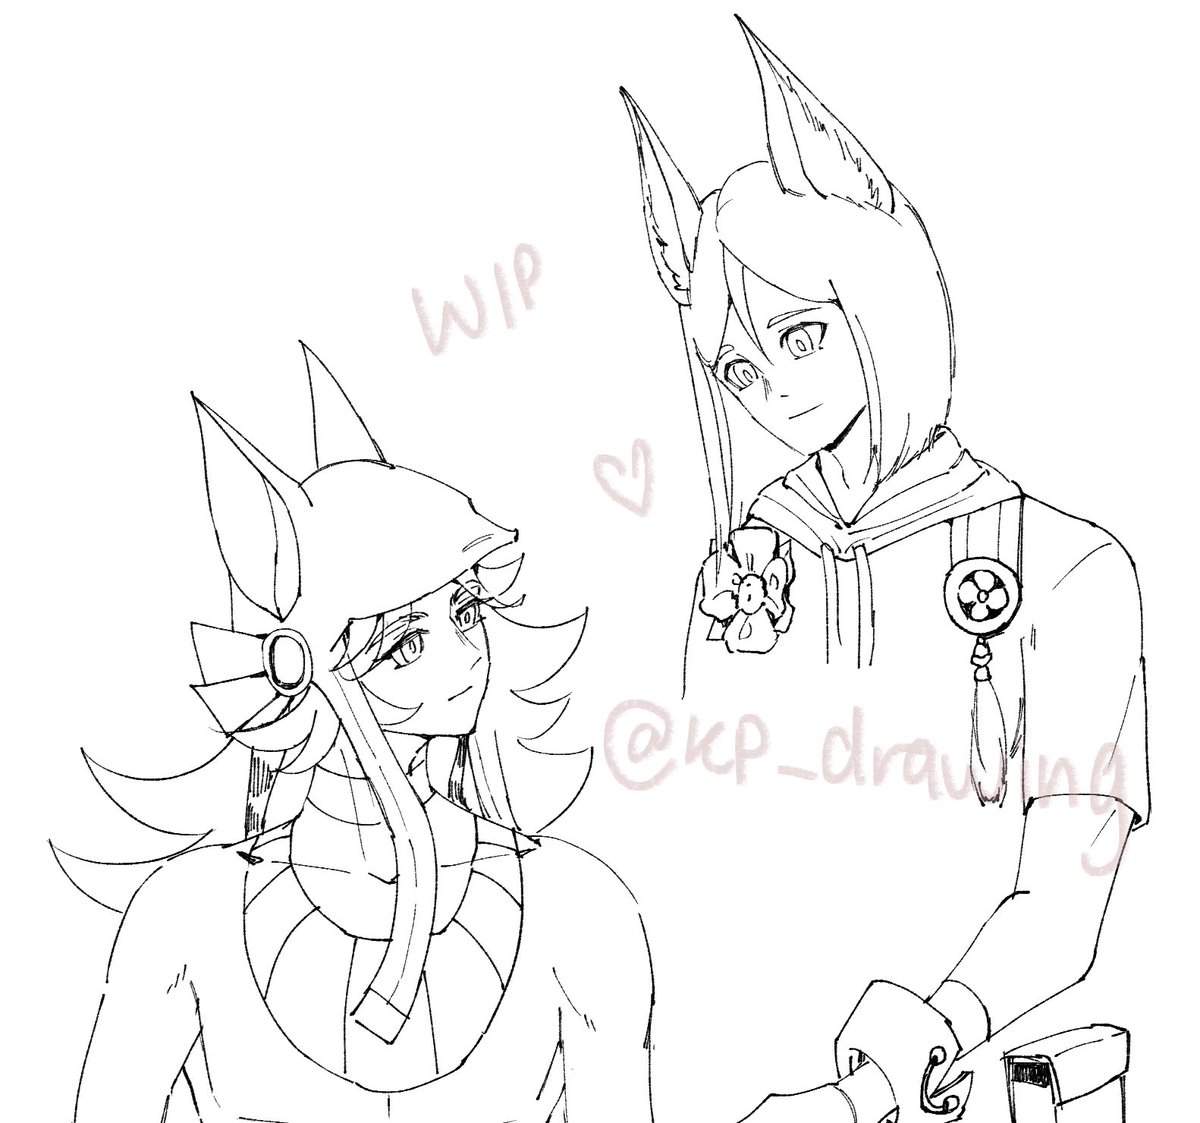 More WIP #cynonari 
Line art for each boys finished! 